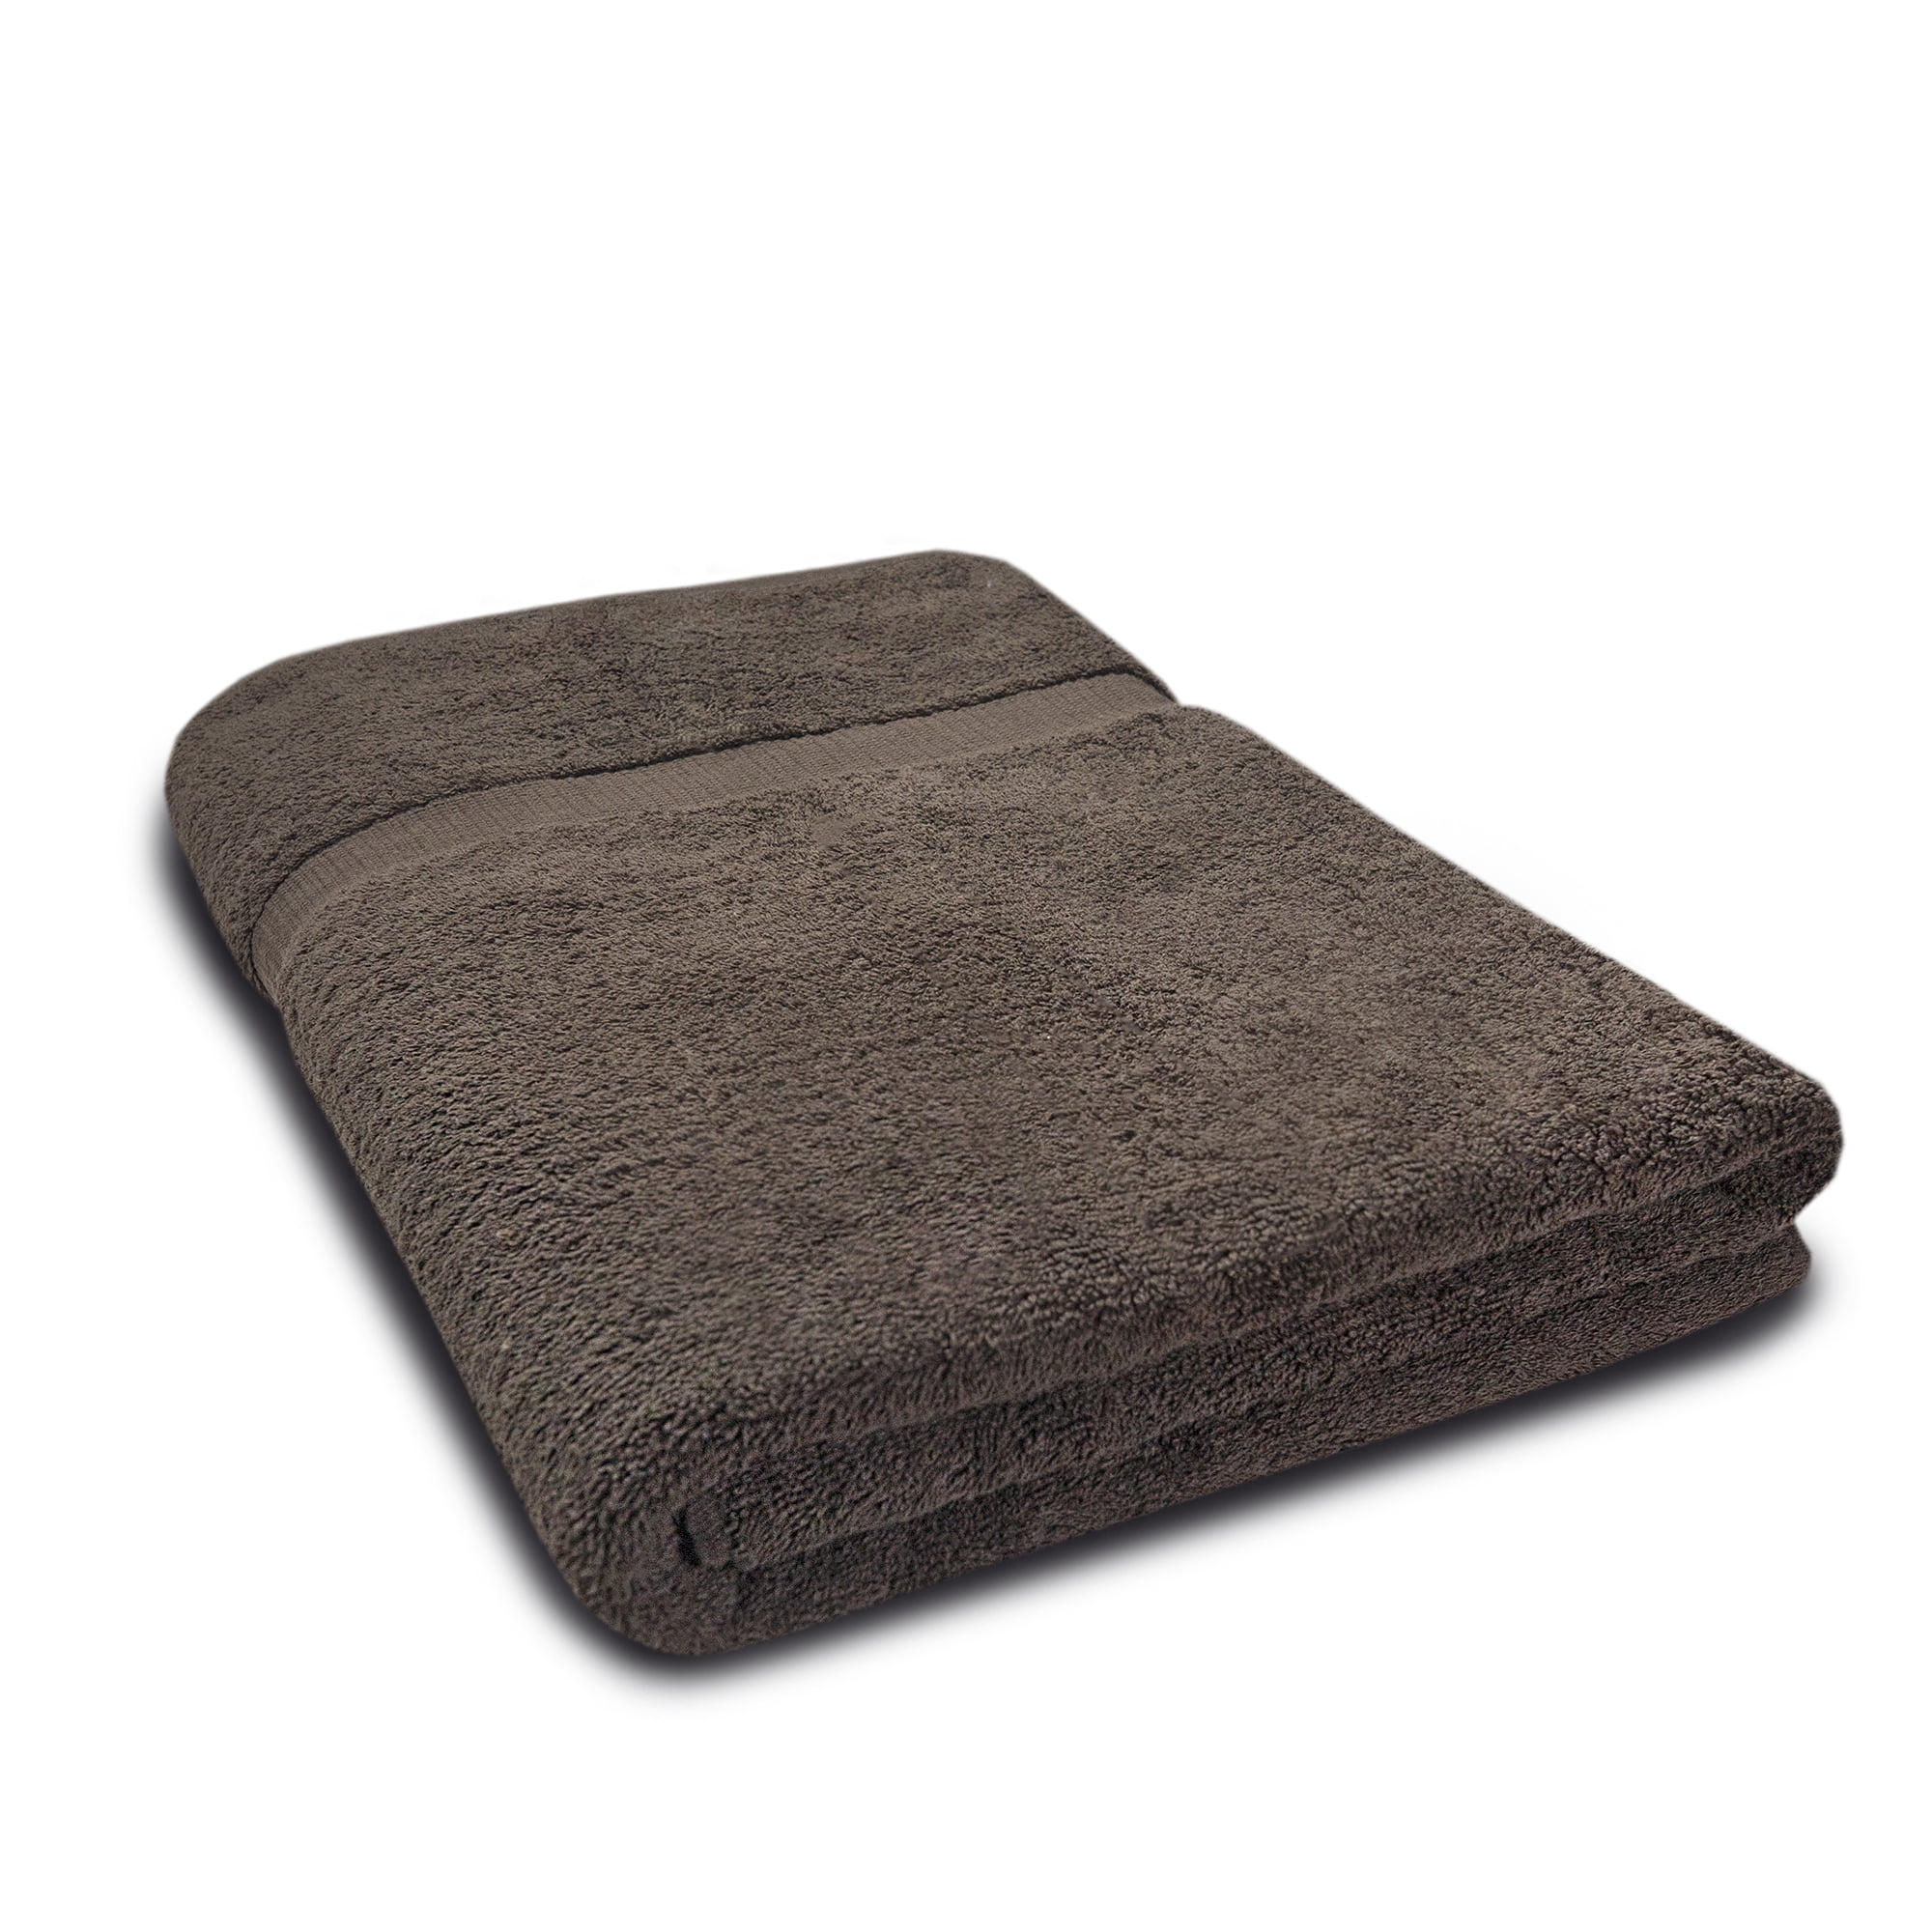 Extra Large Bath Towel - Oversized Ultra Bath Sheet - 100% Cotton - 40in x  90in